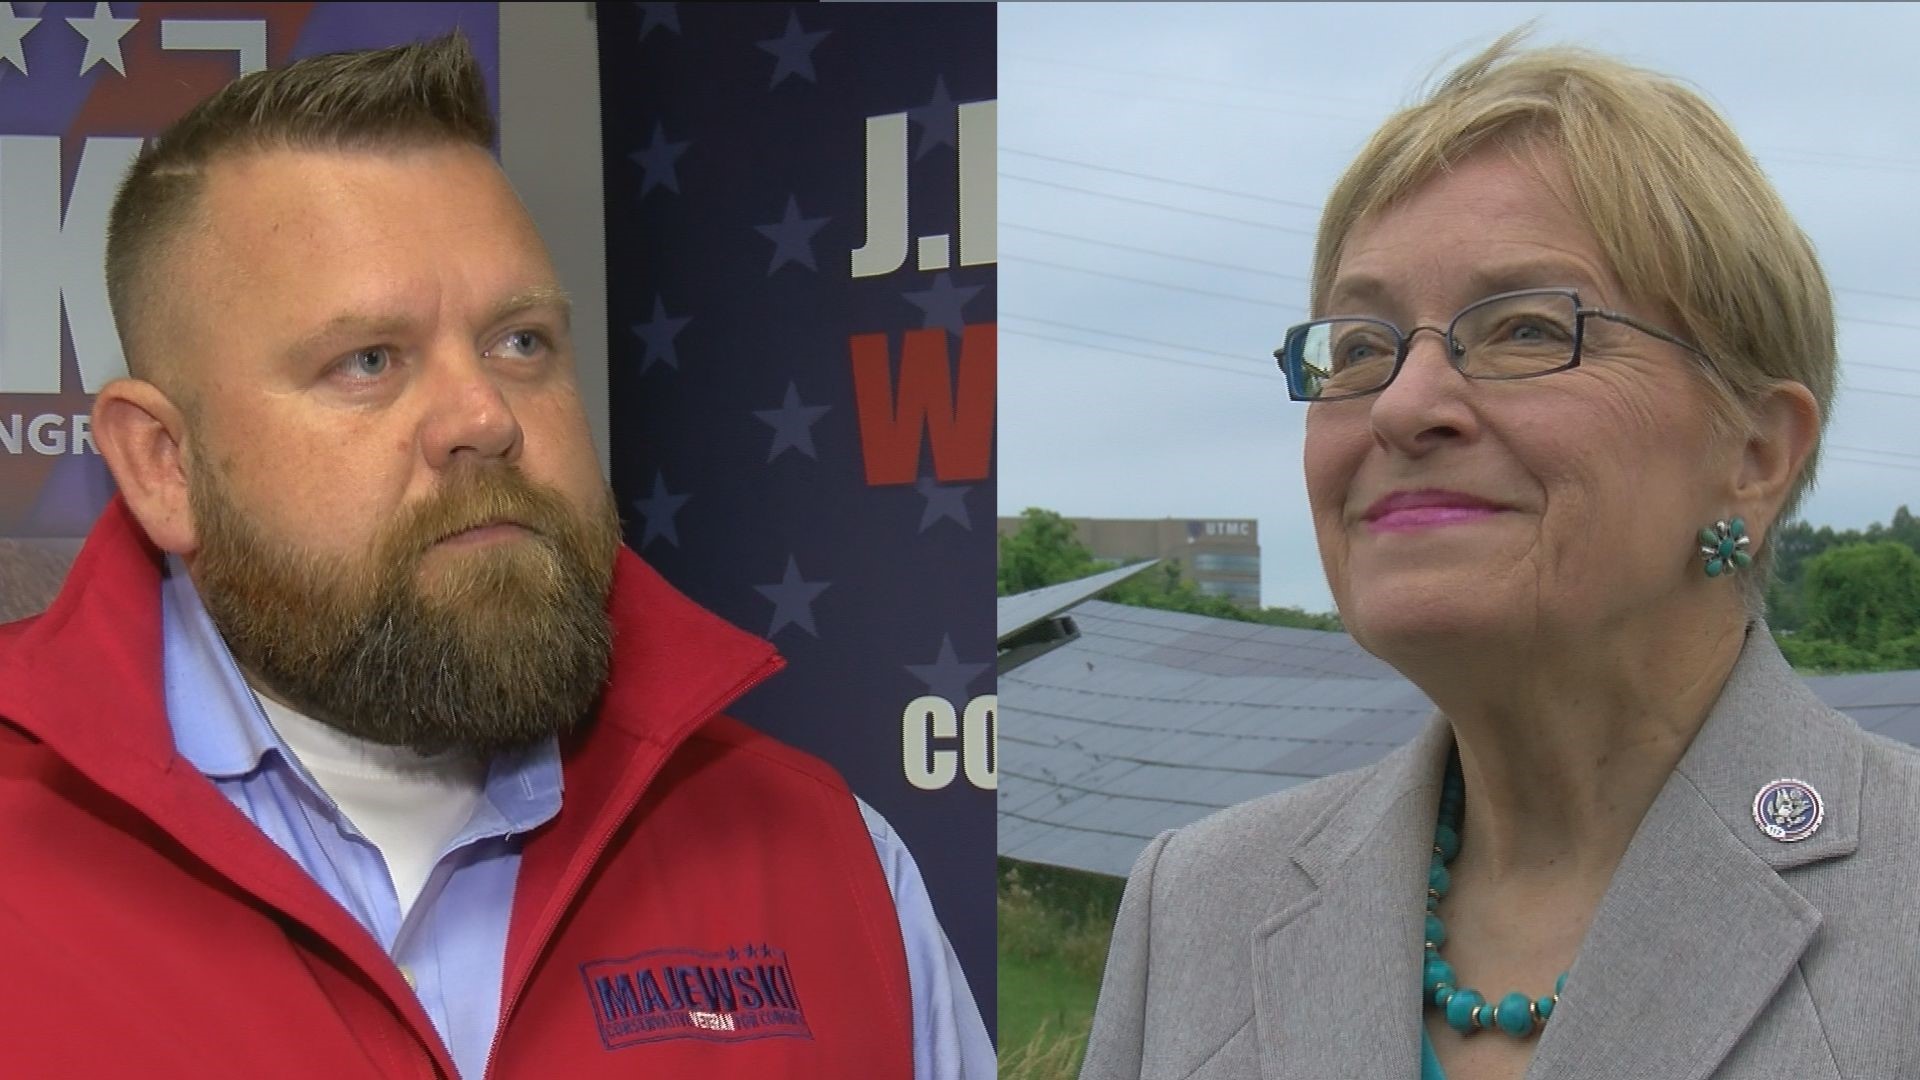 Some candidates are gearing up for the primary election Tuesday. Others are looking ahead to what's next: the general election in November that is just 100 days out.